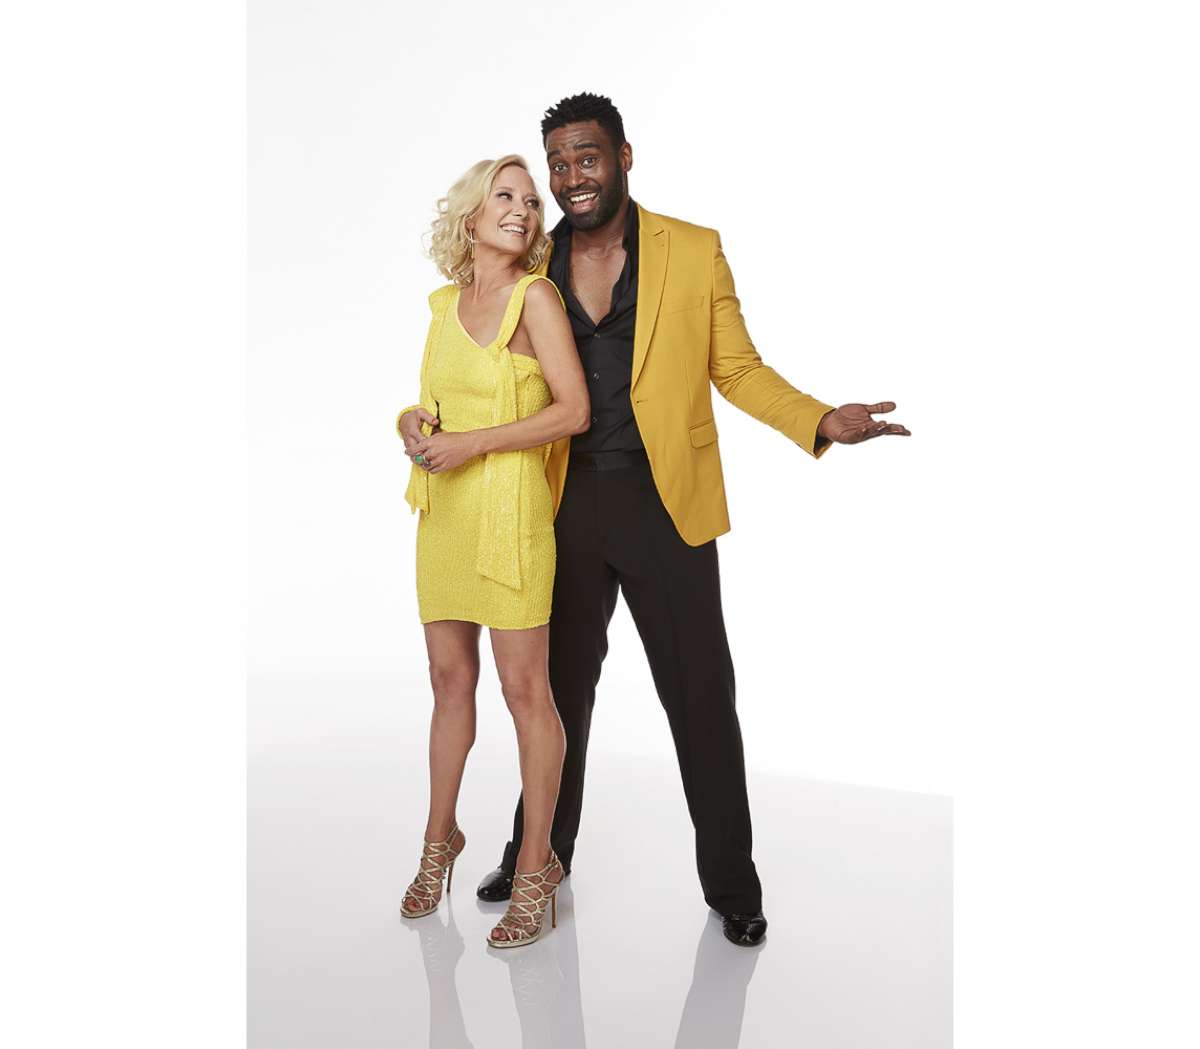 PHOTO: "Dancing with the Stars" stars Anne Heche and Keo Motsepe.